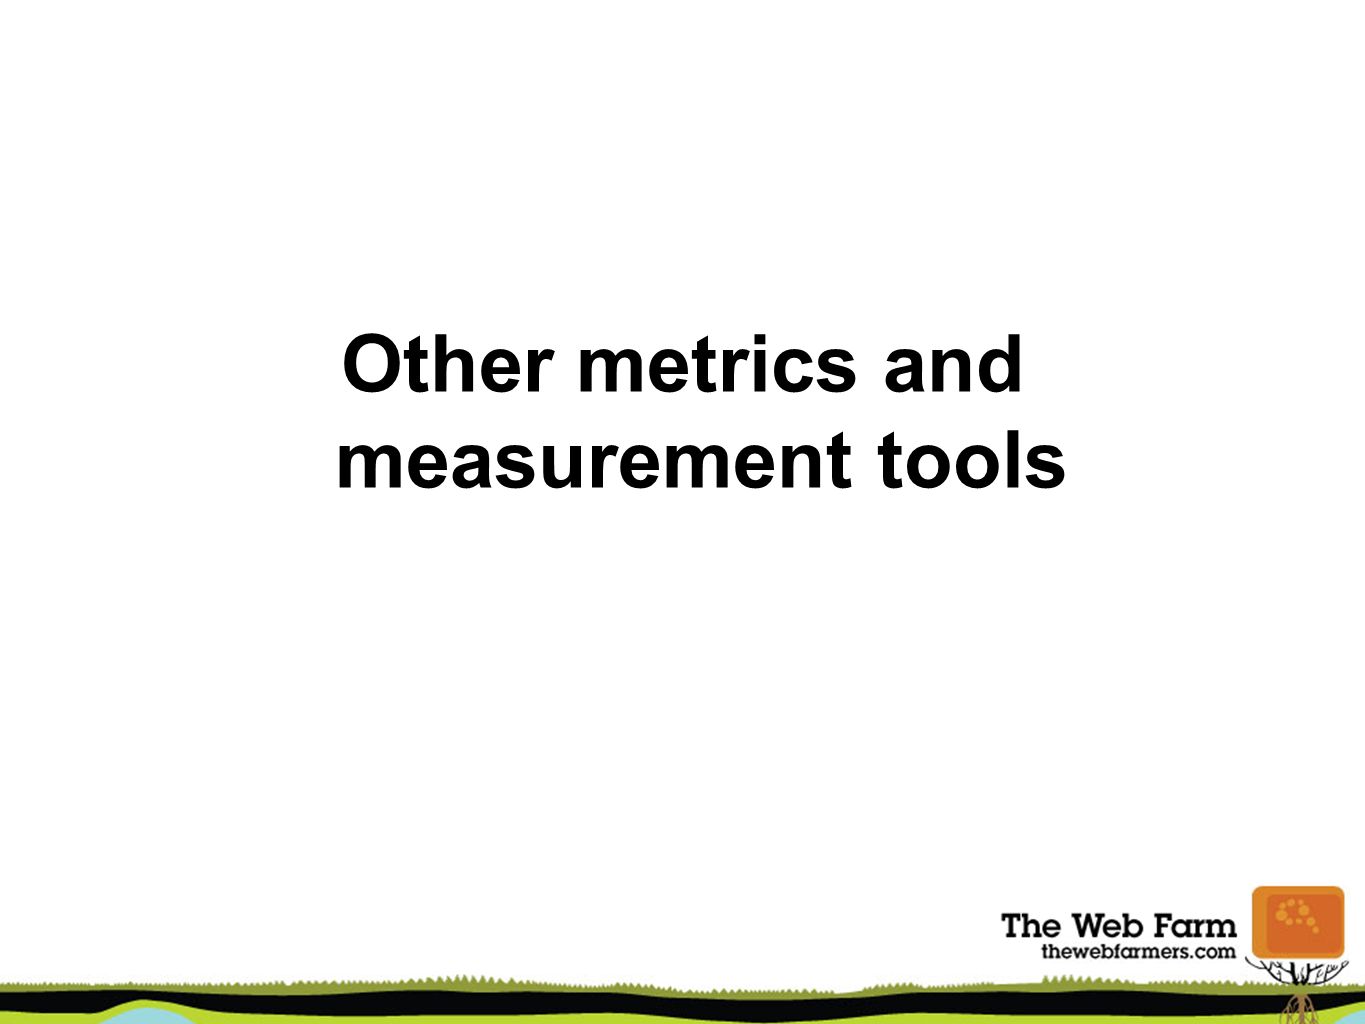 Other metrics and measurement tools